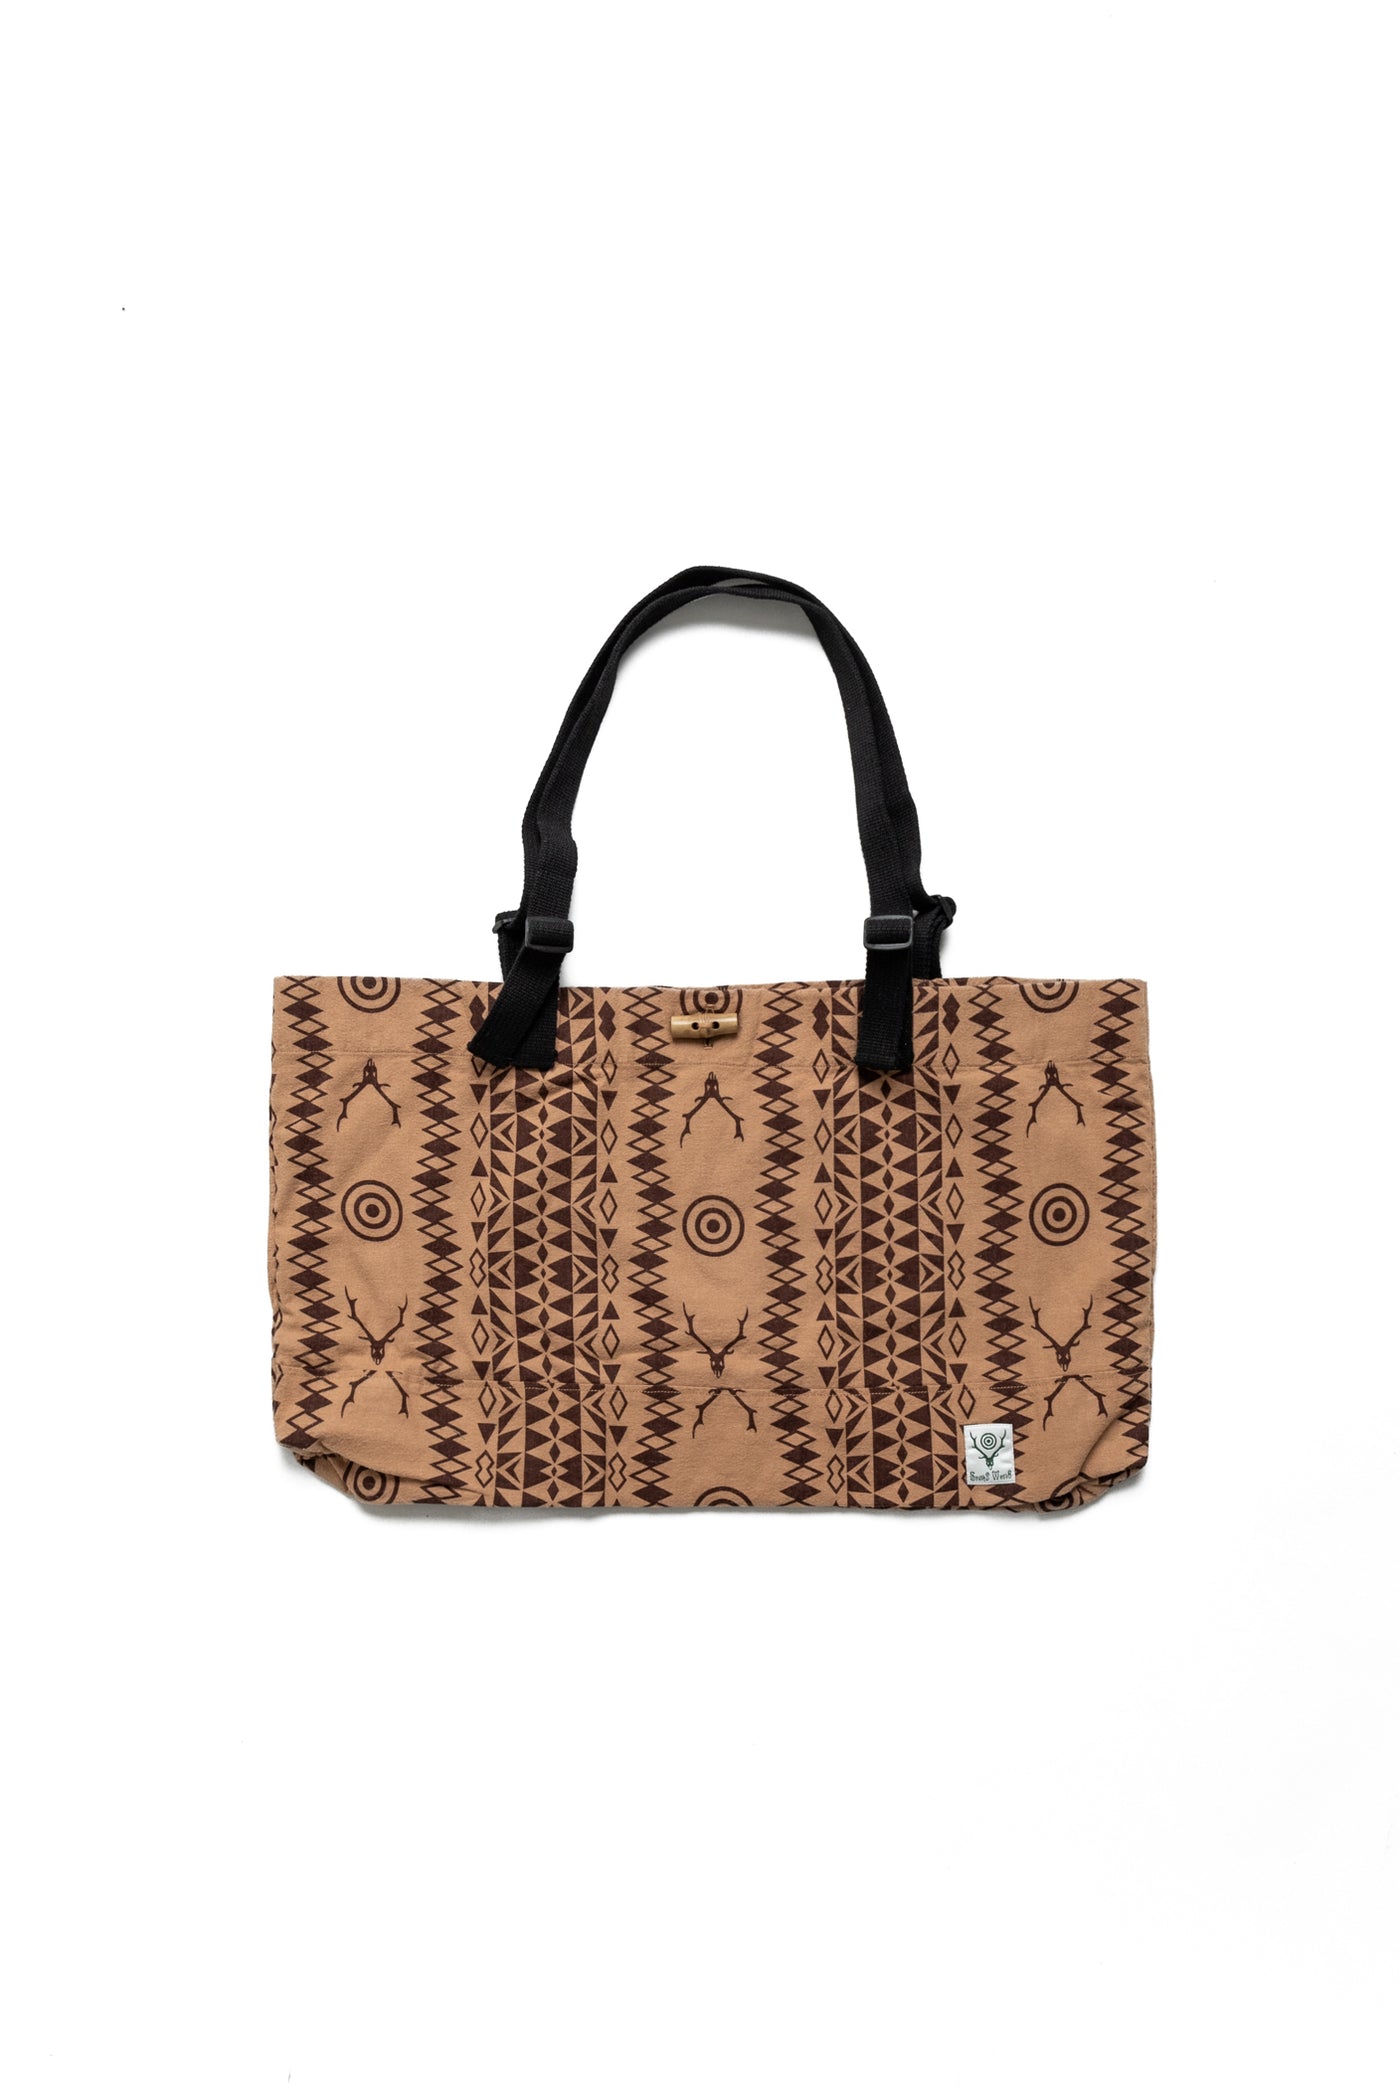 Canal Park Tote Flannel Cloth/Printed - Skull&Target